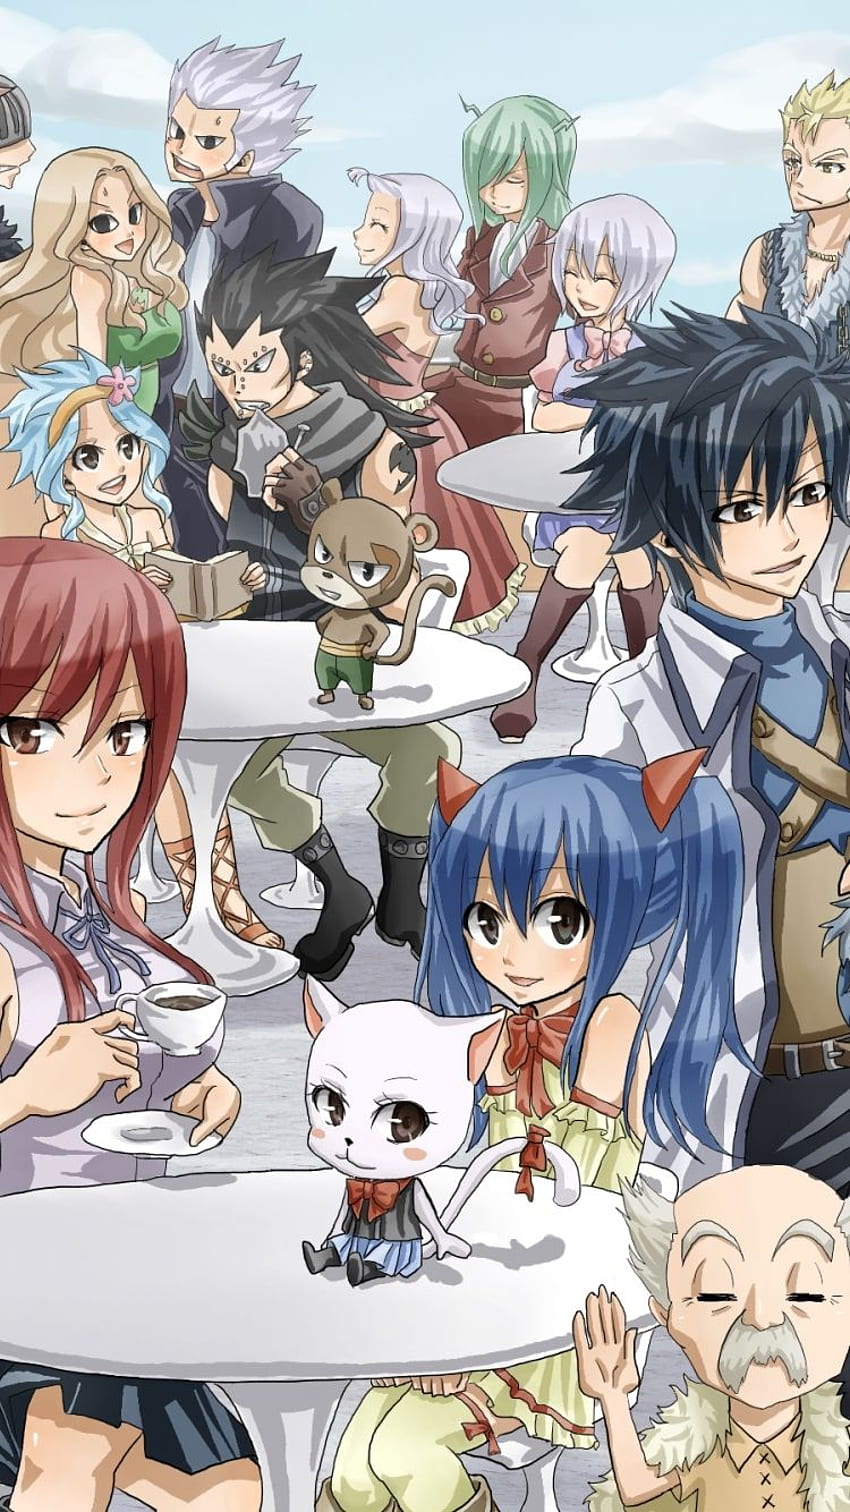 200+] Fairy Tail Wallpapers, fairy tail anime - thirstymag.com